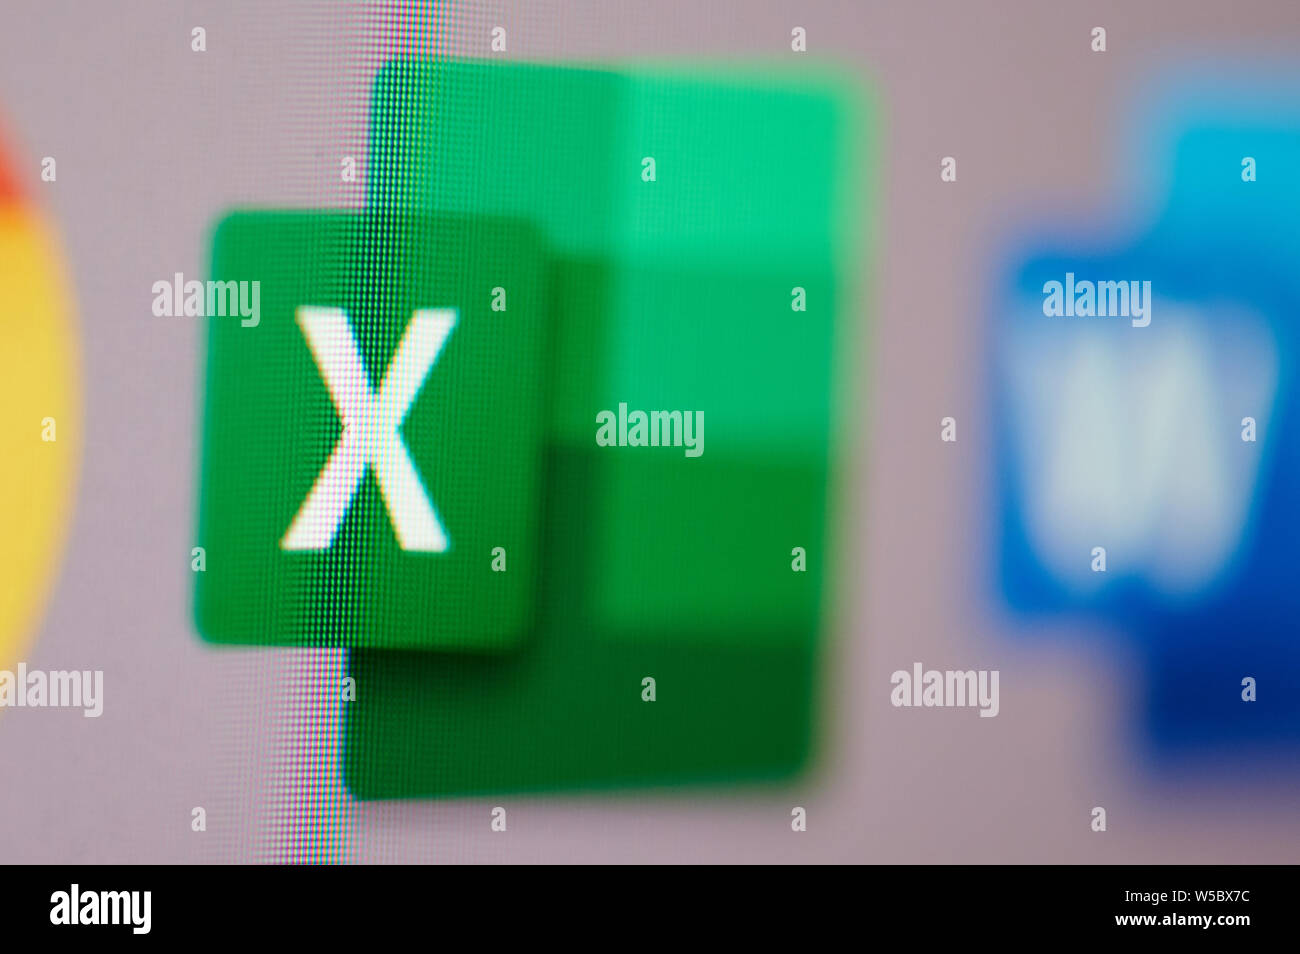 New york, USA - july 26, 2019: Starting Microsoft excel software on computer macro close up view in pixel screen Stock Photo